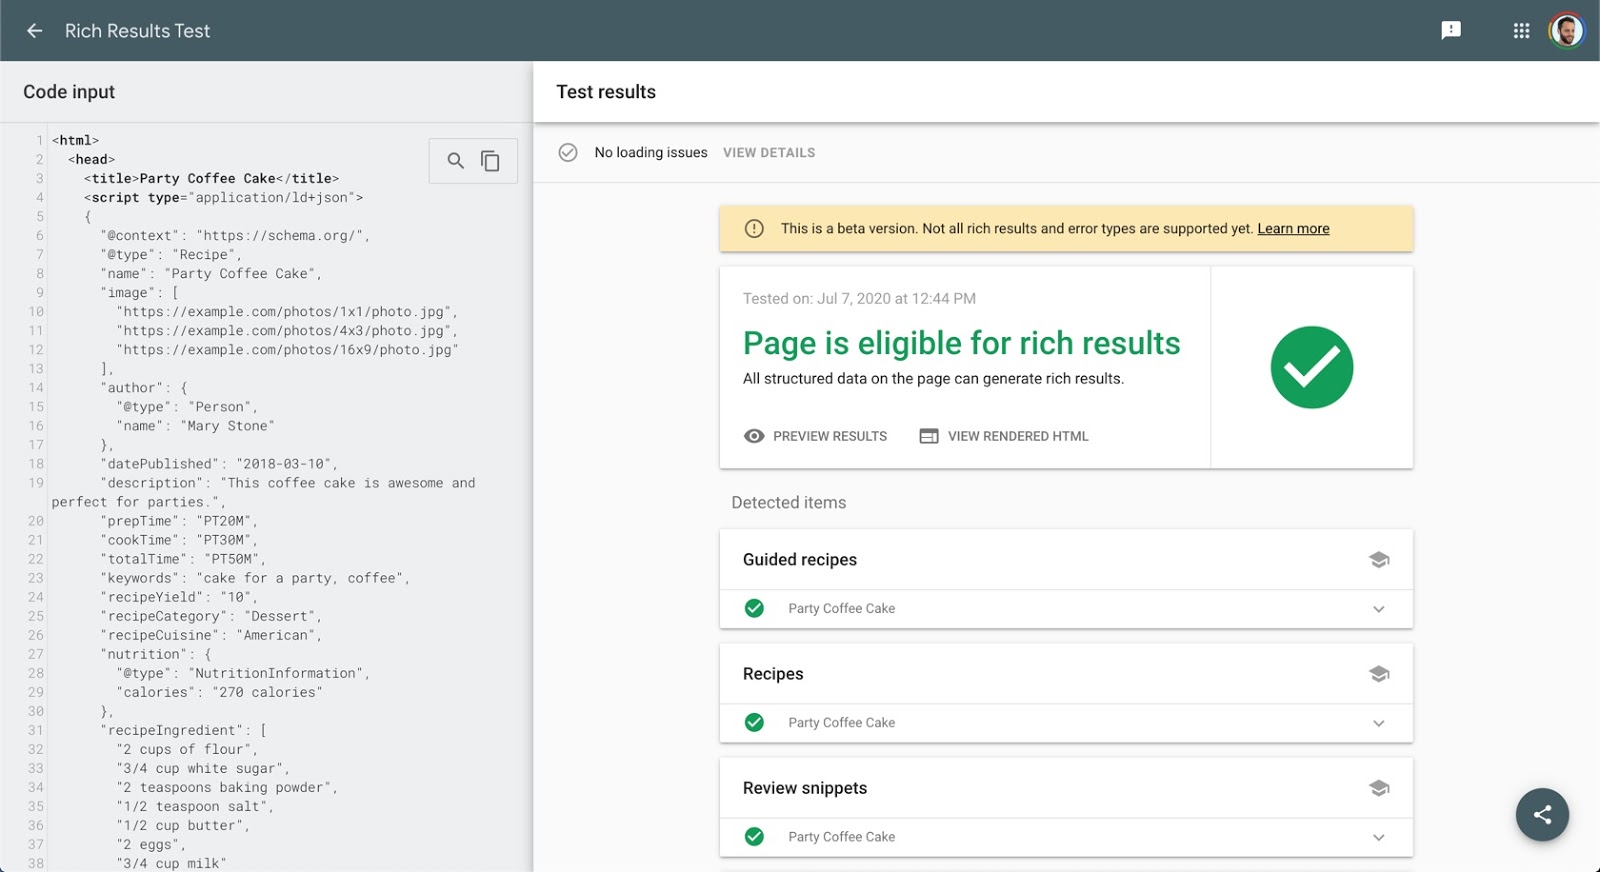 Update Google Search Console: Rich Result Test